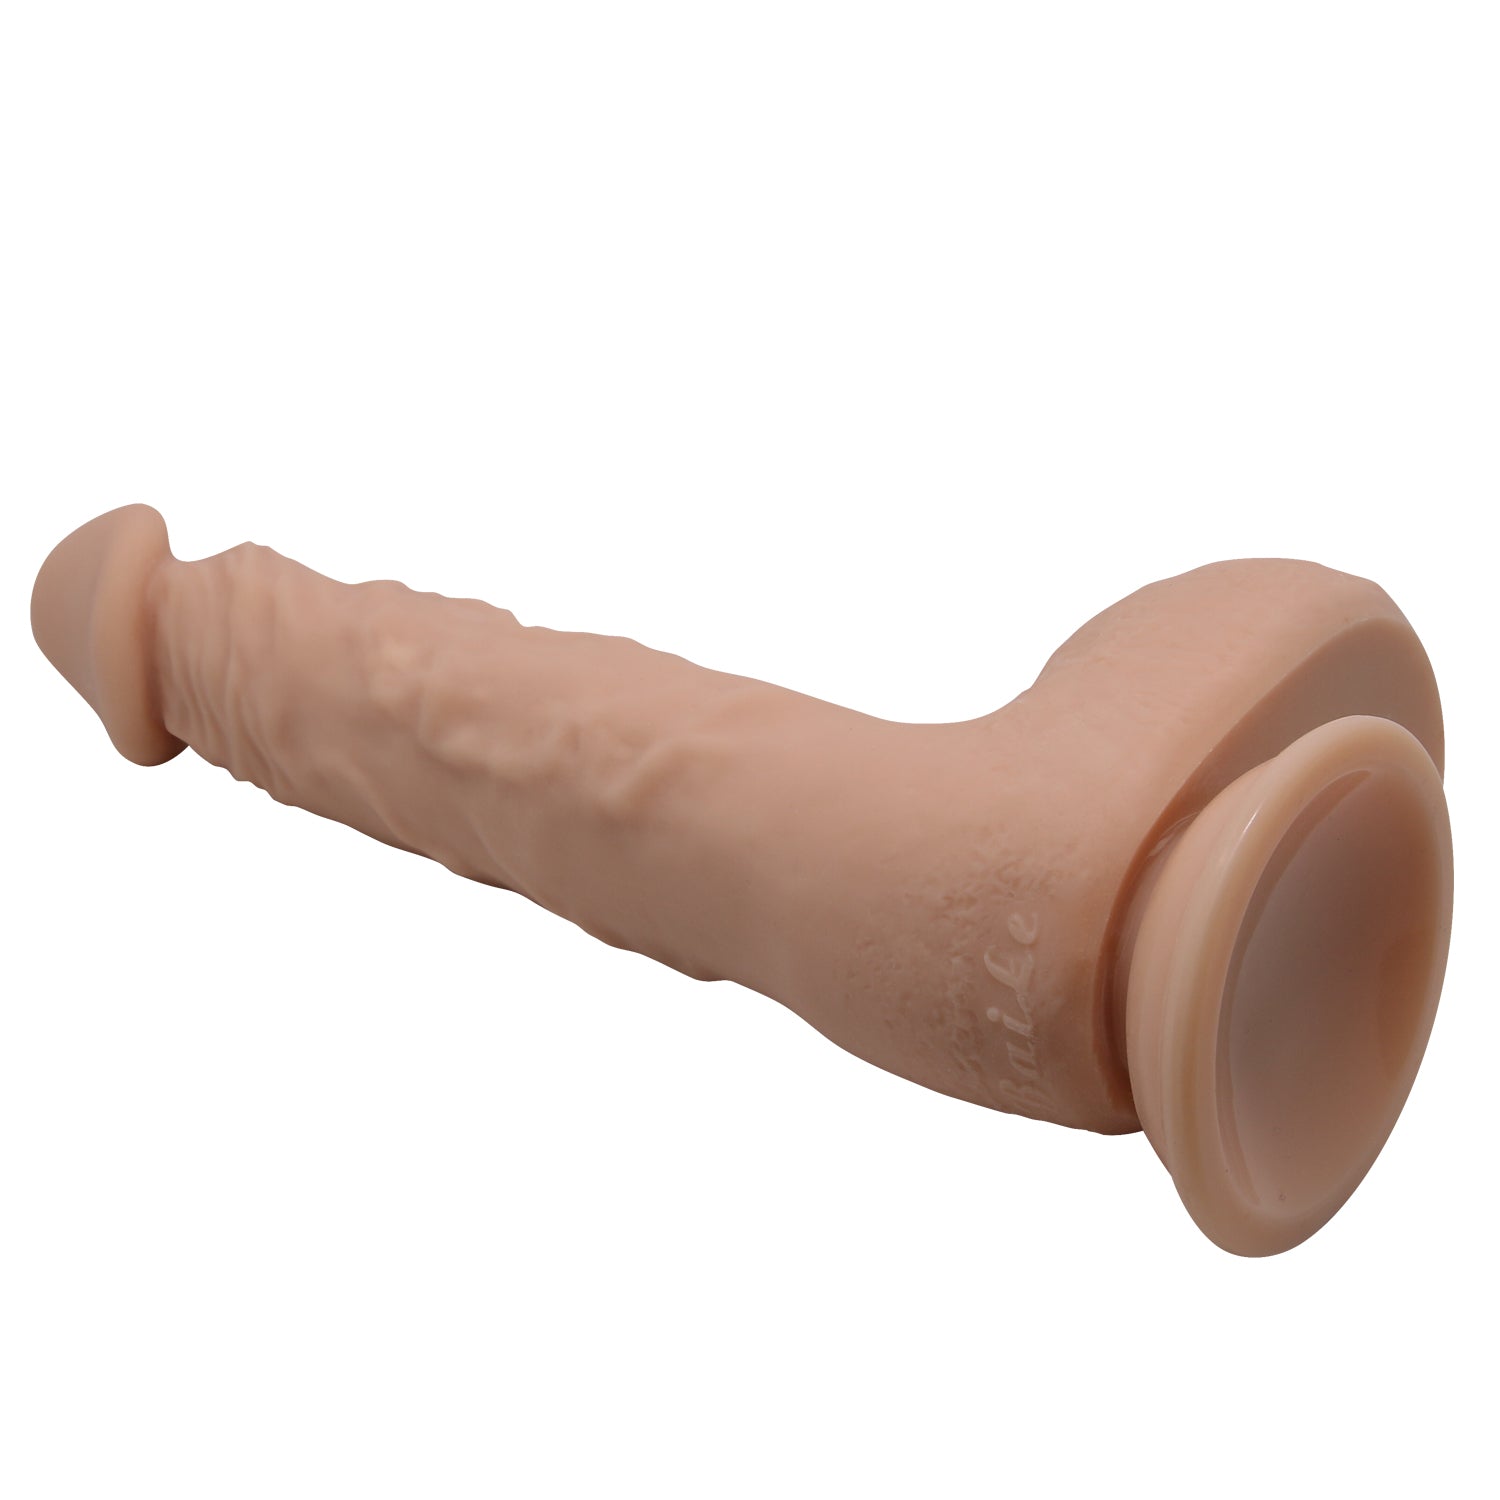 Baile 9.8 Inch Lifelike Dildo With Suction Cup In Flesh